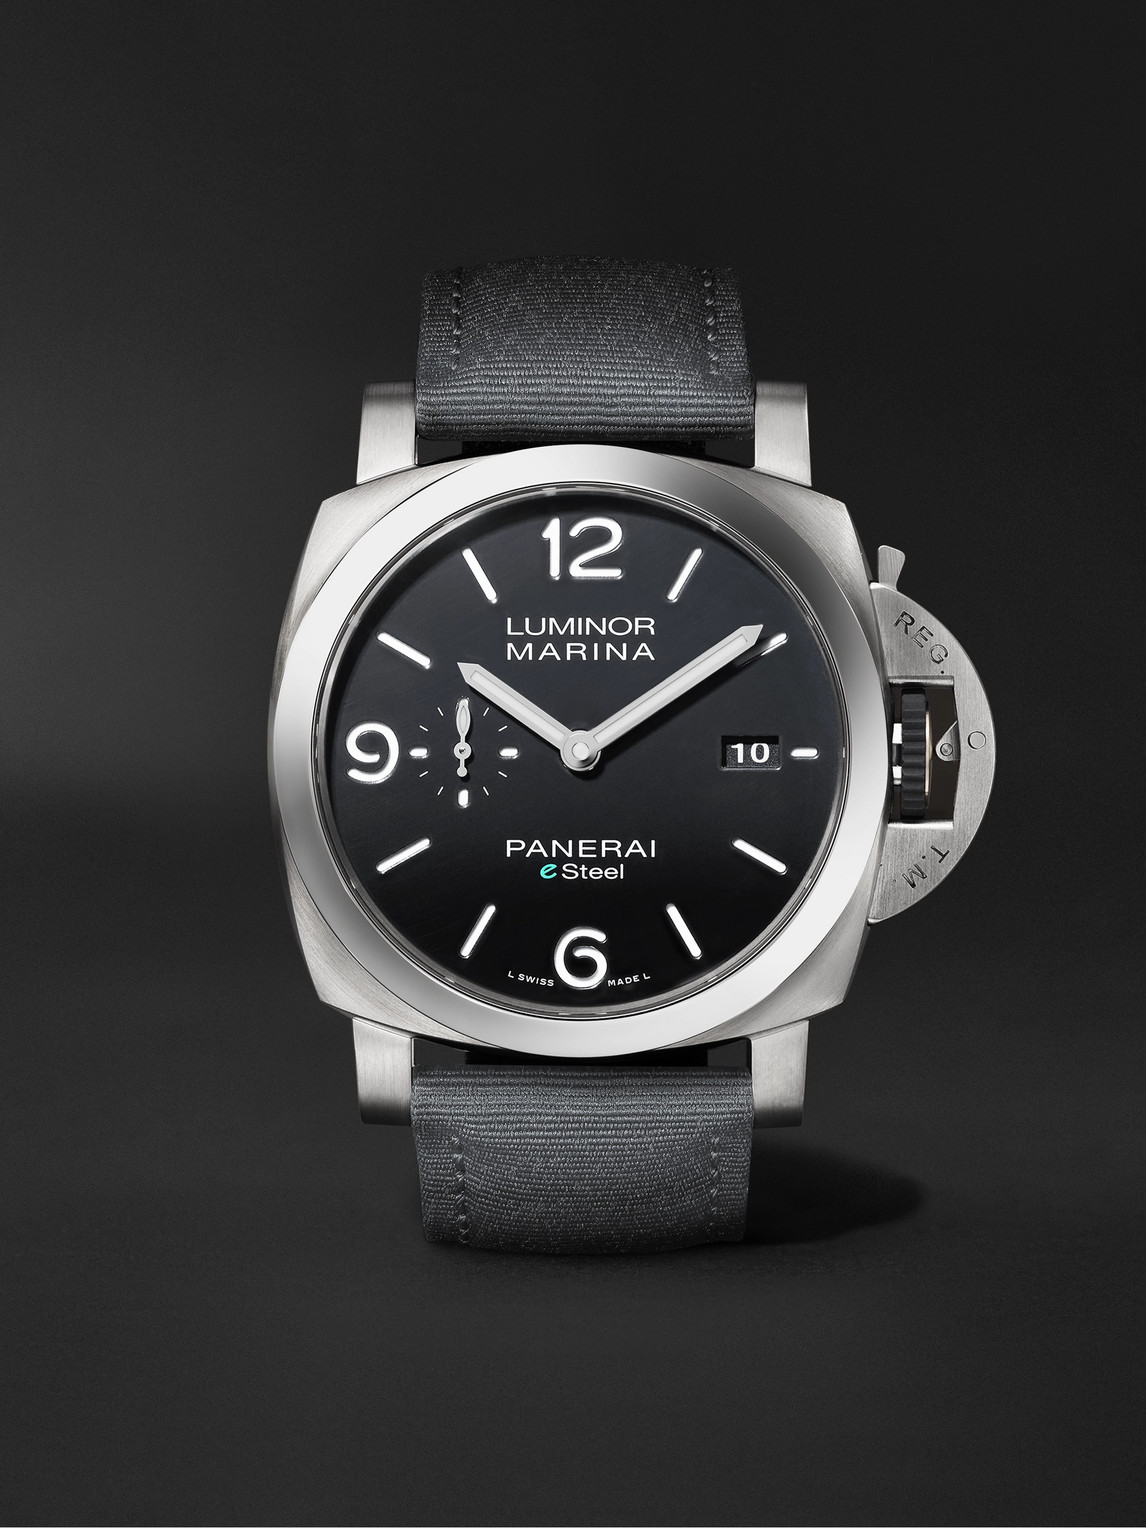 Panerai Luminor Marina Automatic 44mm Esteel And Recycled Pet Watch, Ref. No. Pam01158 In Black